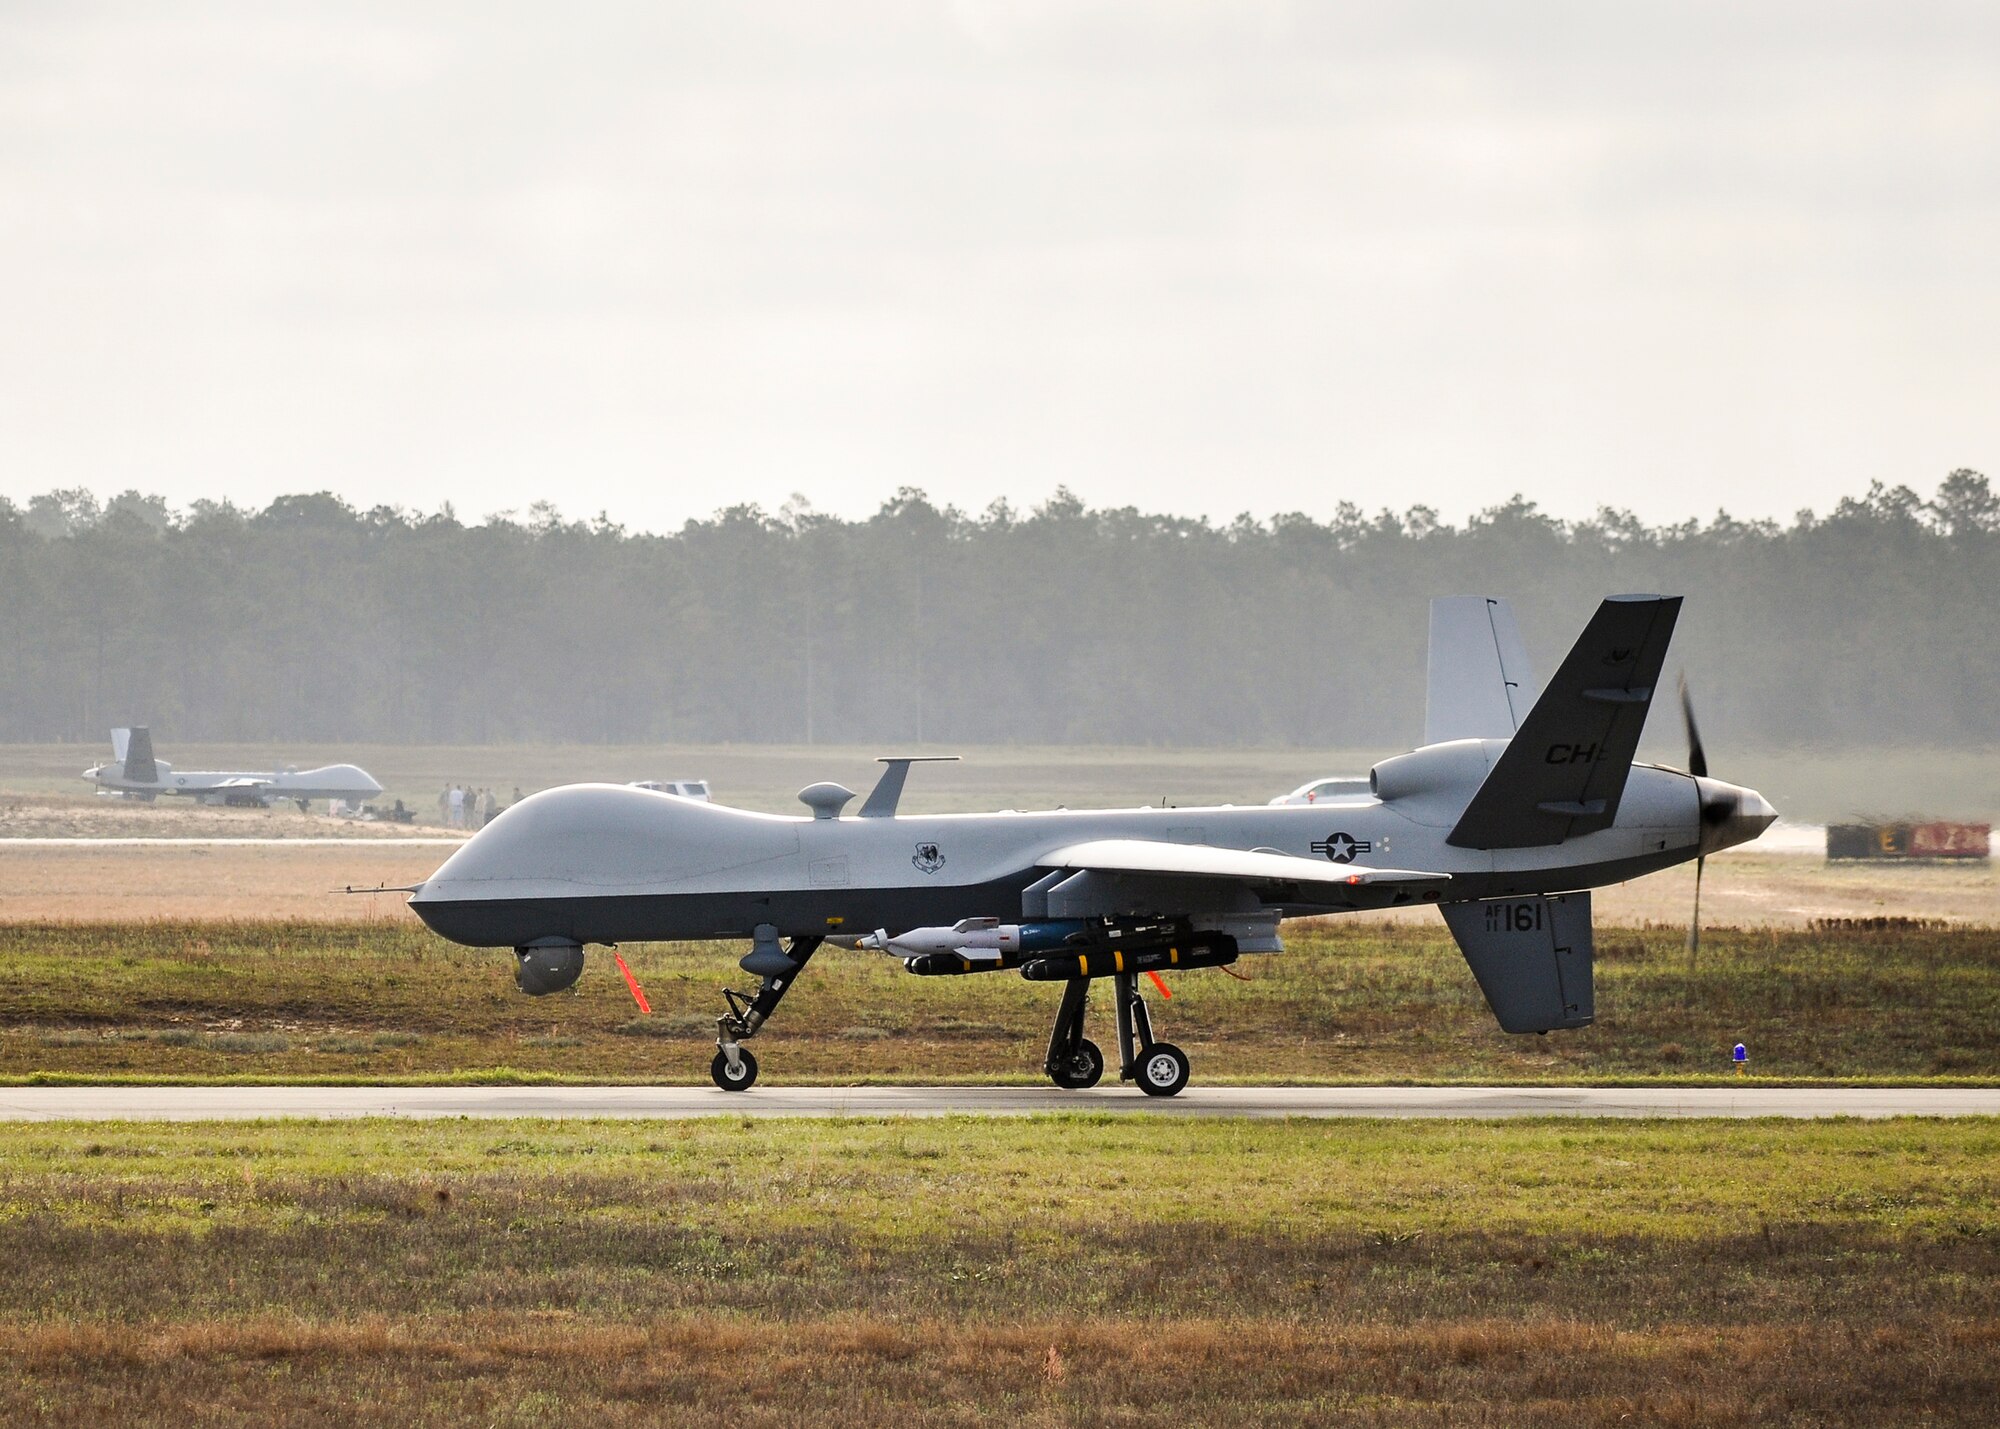 An MQ-9 Reaper prepares to take off from Duke Field, Fla., March 15. The Reapers operated at both Duke Field and Eglin Air Force Base, Fla., during the air-to-ground Weapon System Evaluation Program, Combat Hammer, from March 14-17. (U.S. Air Force photo by Susan Garcia)